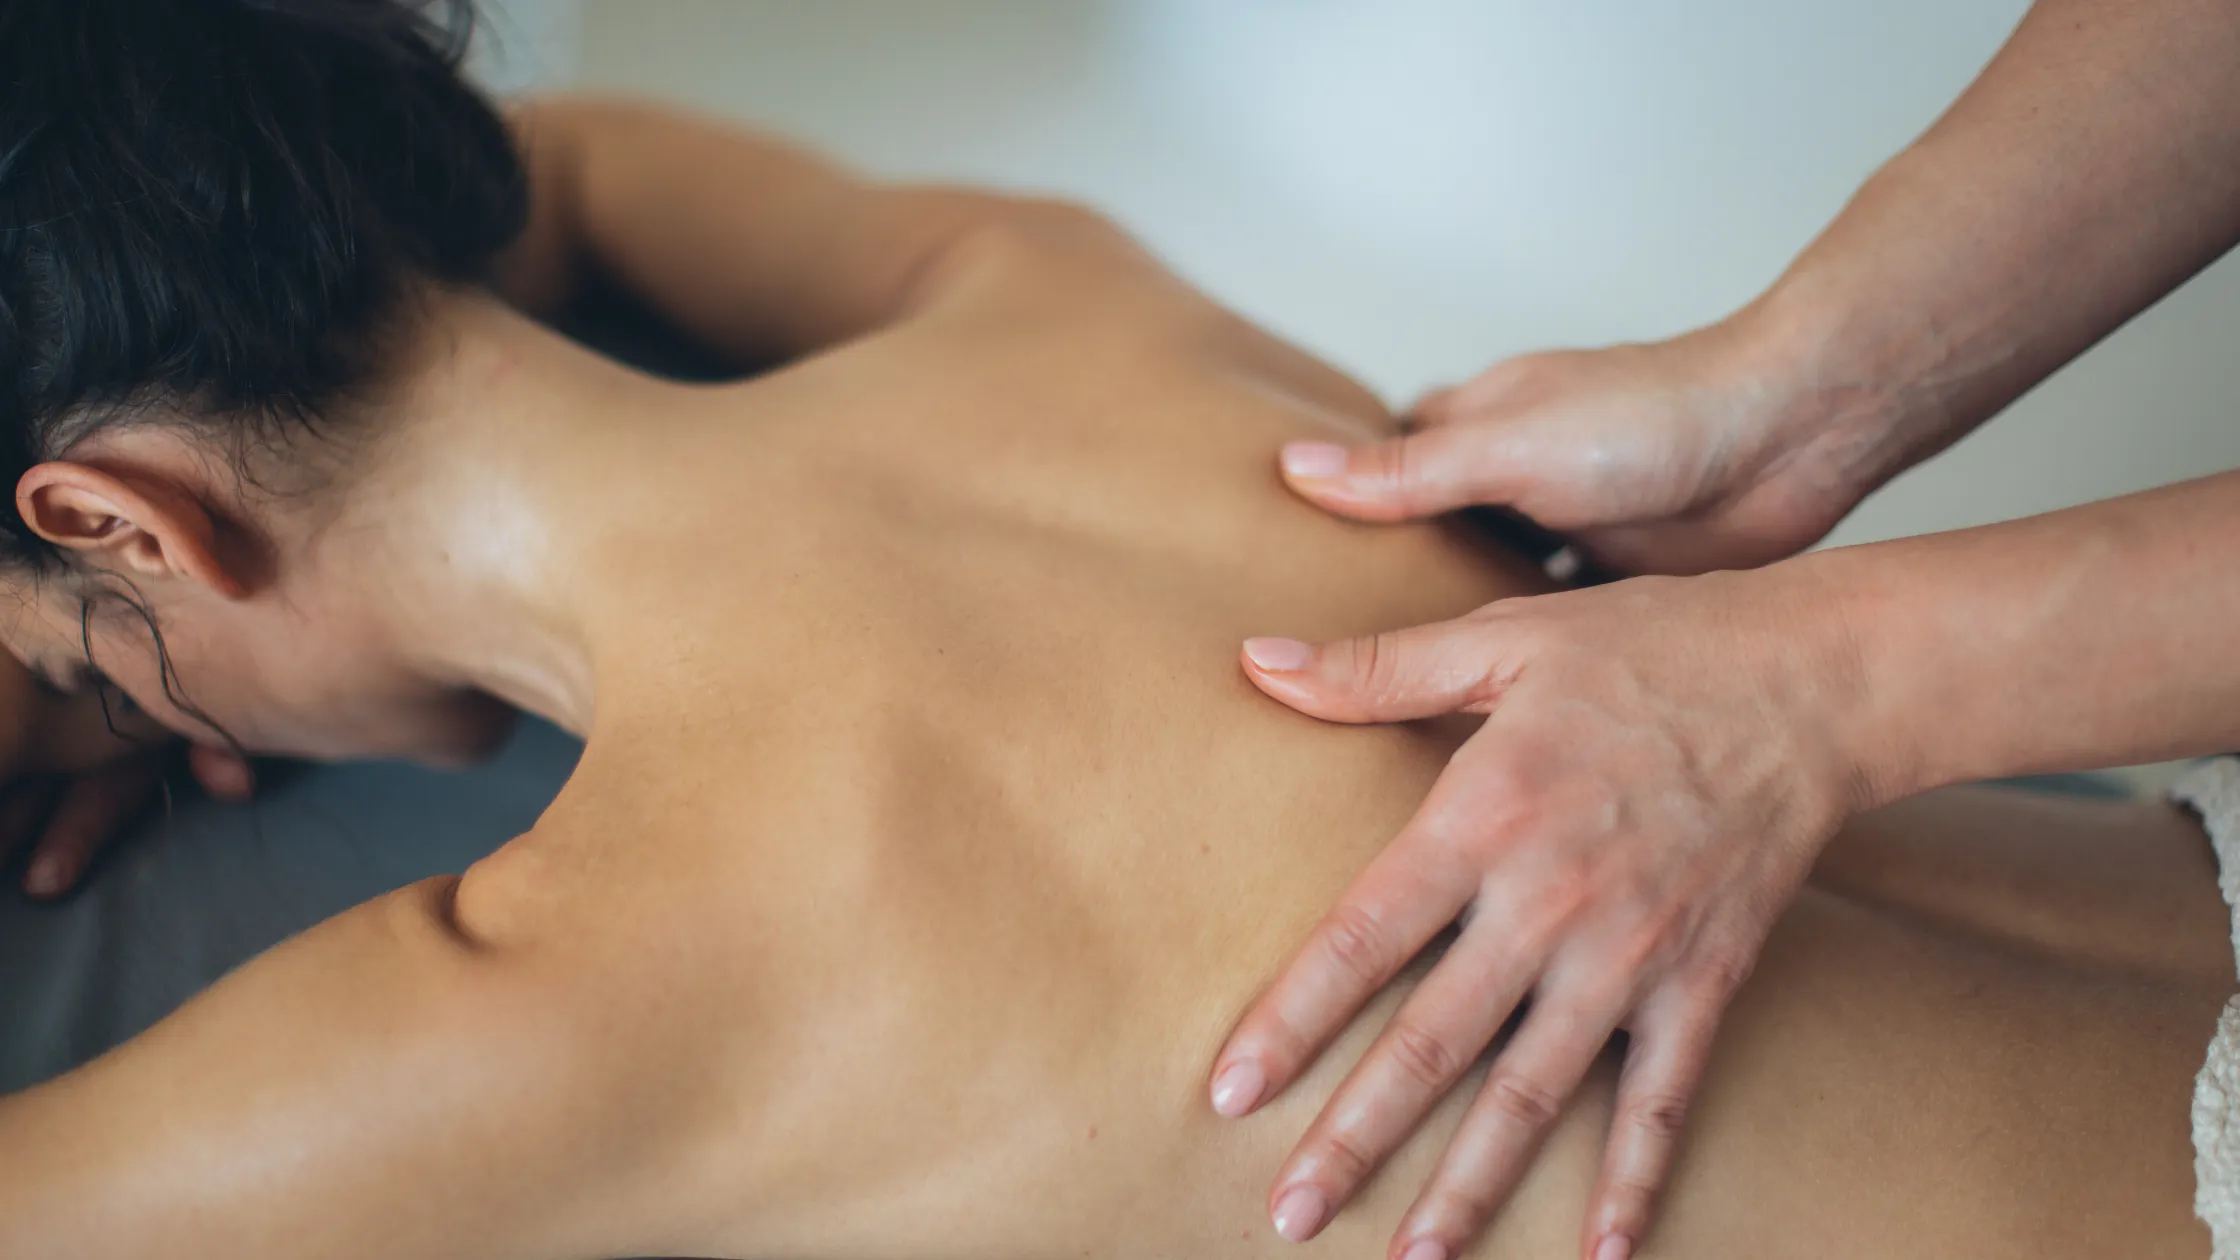 Happy Massage in Hungary, Europe | Massage Parlors,Sex-Friendly Places - Rated 1.1